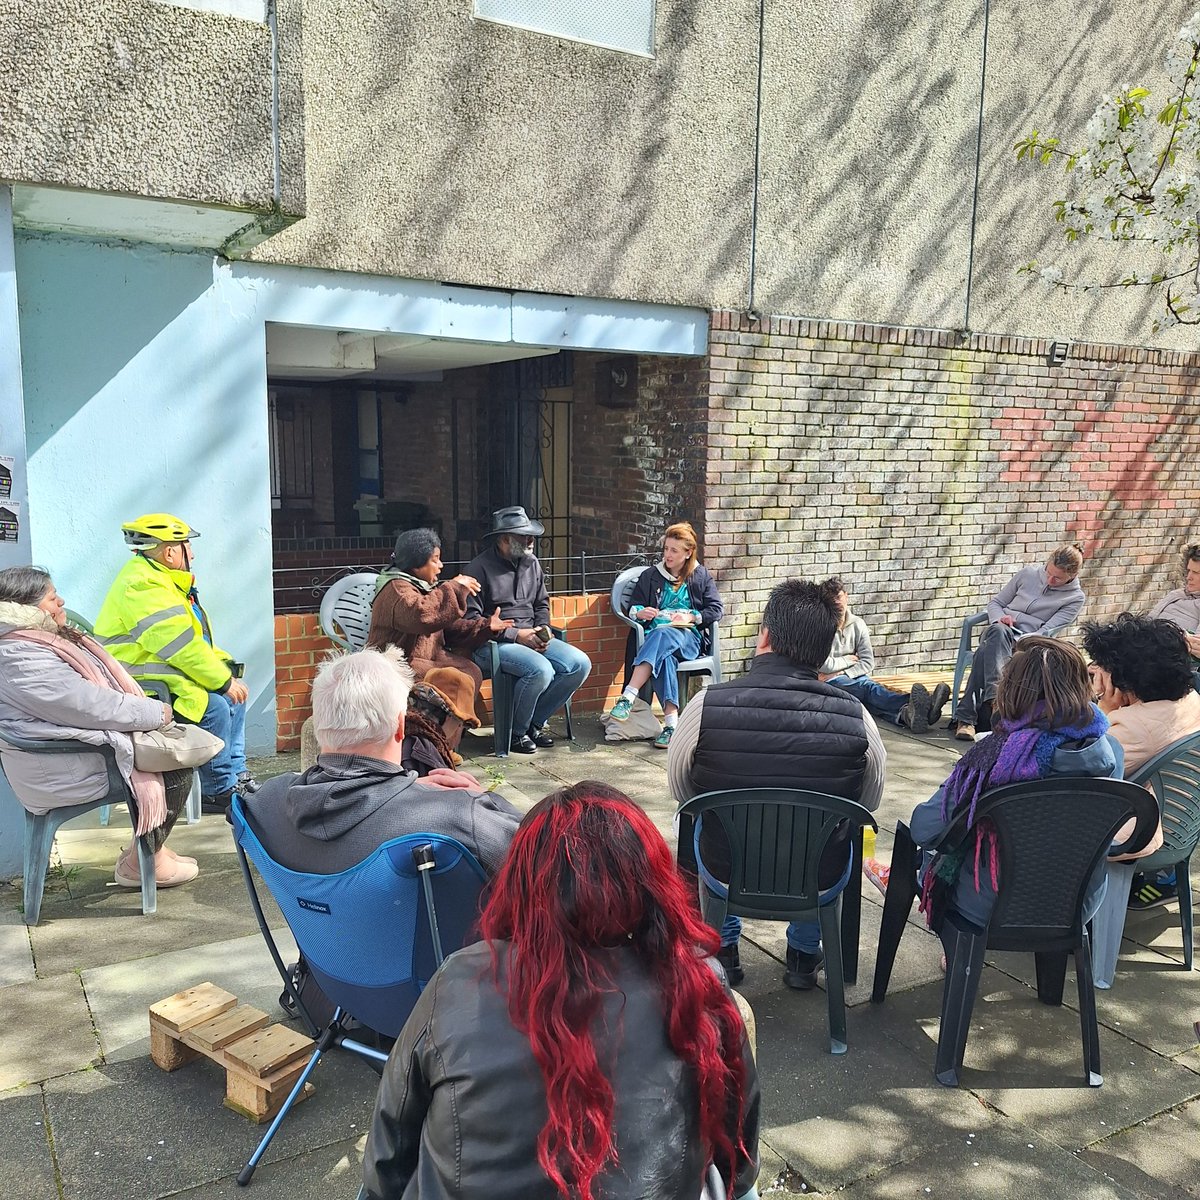 The resistance is in full swing this fine afternoon on the Lesnes Estate. We are honoured by the attendance of @pilcmv letting us in on our rights. YOU GOTTA FIGHT ✊🏿 FOR YOUR RIGHT TO HOUSING! @XRLondon @XRFamilies @HousRebellion